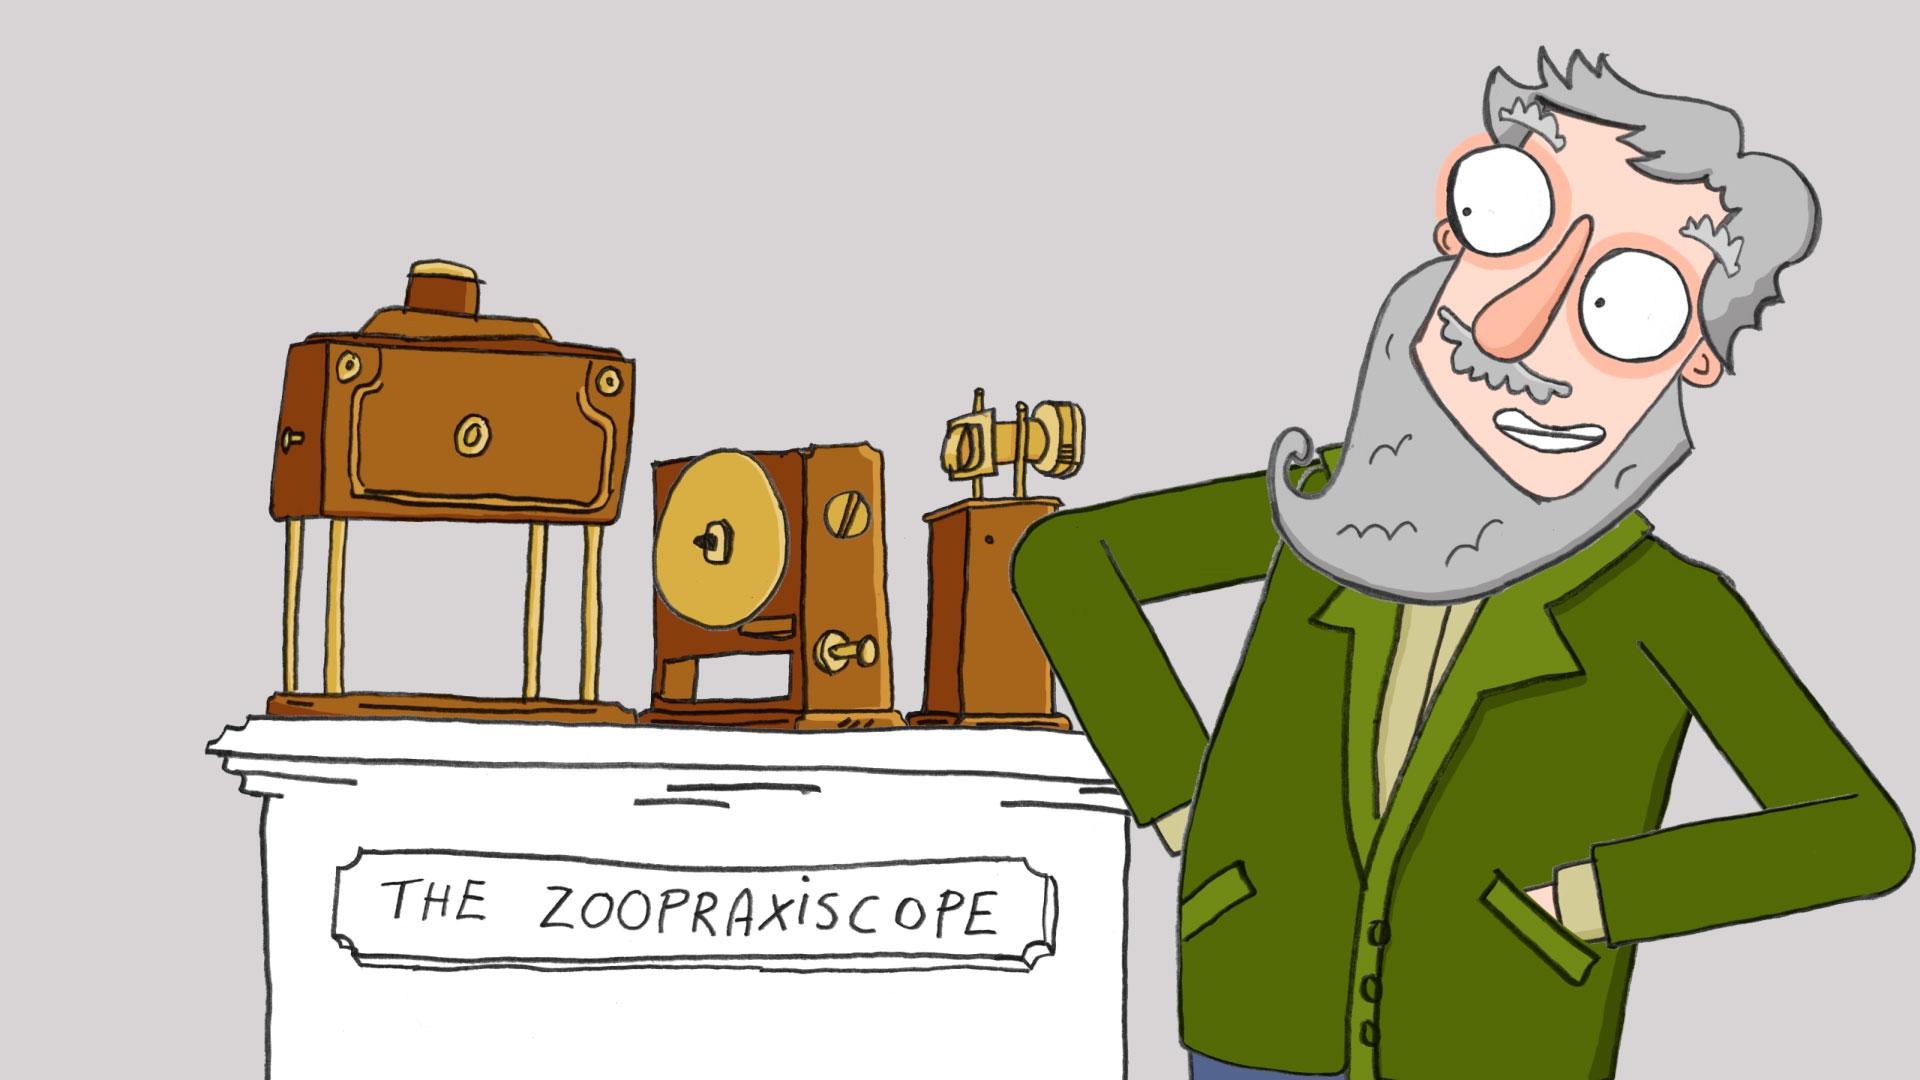 An animated drawing of Muybridge stood next to his zoopraxiscope.